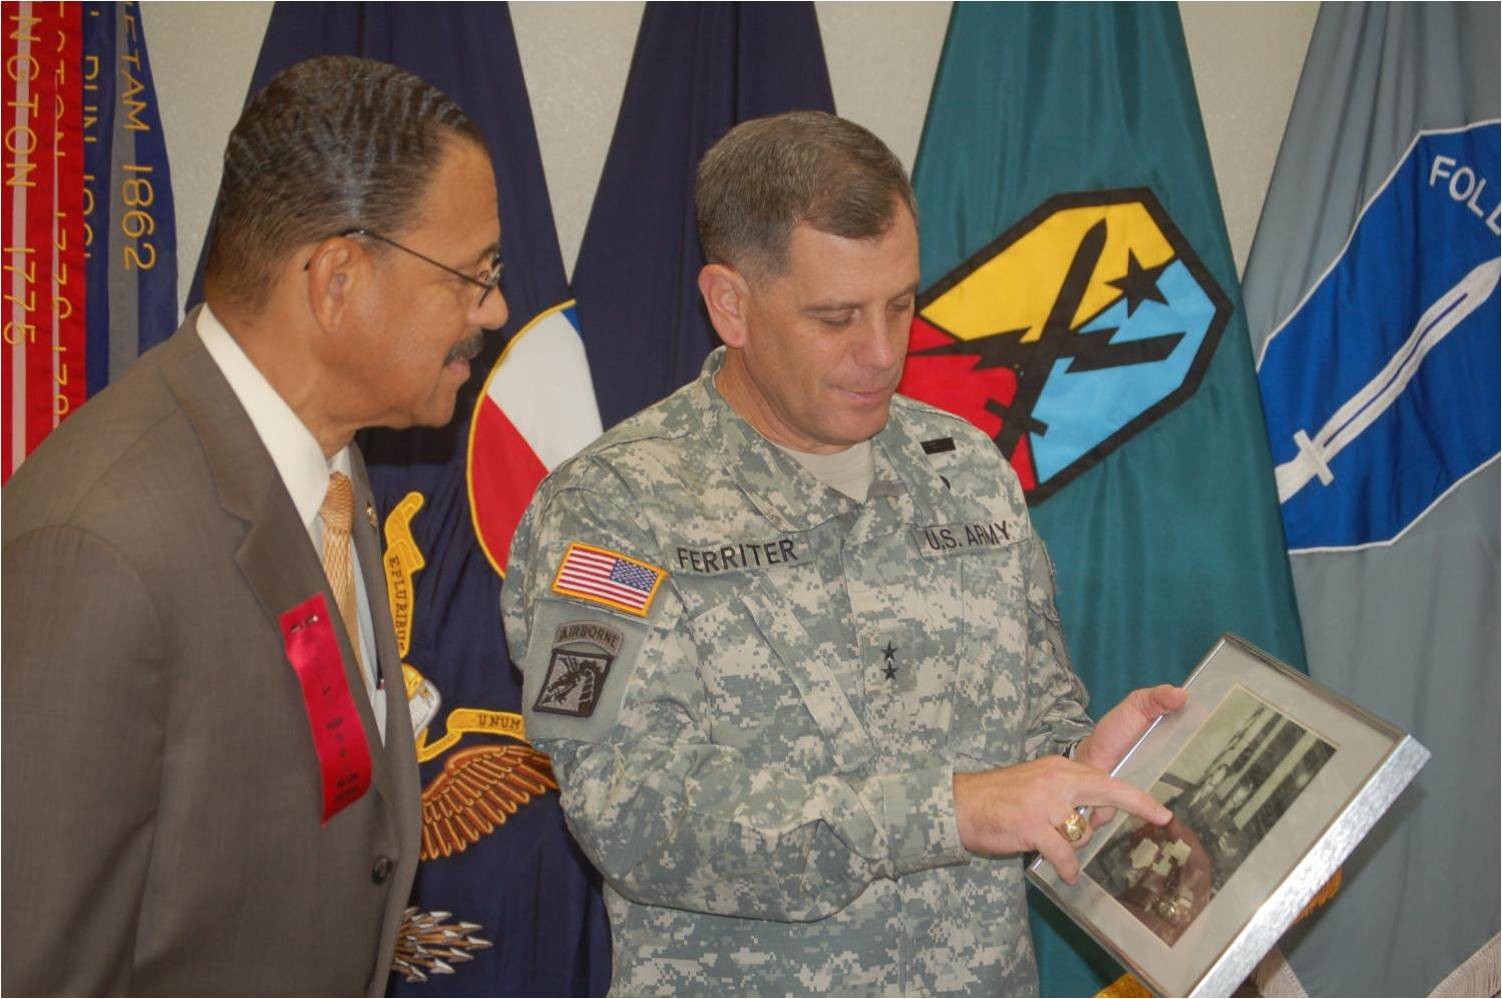 congressional-visit-article-the-united-states-army